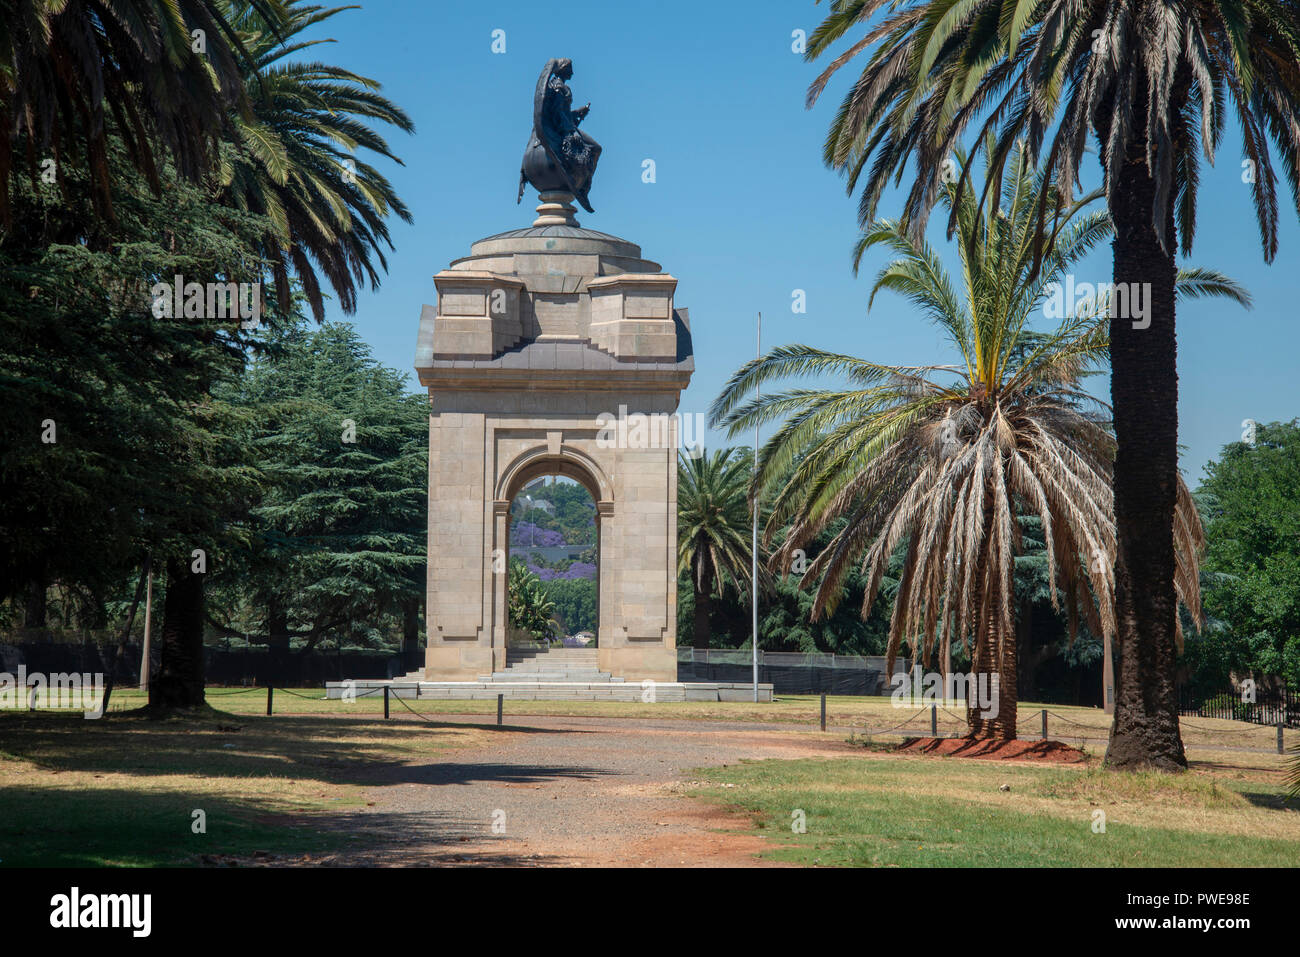 Johannesburg, South Africa, 16 October, 2018. The Anglo Boer War Memorial, in Saxonworld, is seen against a clear blue sky as summer approached South Africa. Originally called the Rand Regiments Memorial, the monument was dedicated to the men of the Witwatersrand who joined as British soldiers in the Rand Regiments and who died during the Second Boer War (1899-1902). The memorial was renamed and rededicated on 10 October 10, 1999, to all people who died during the Second Boer War. Credit: Eva-Lotta Jansson/Alamy Live News Stock Photo